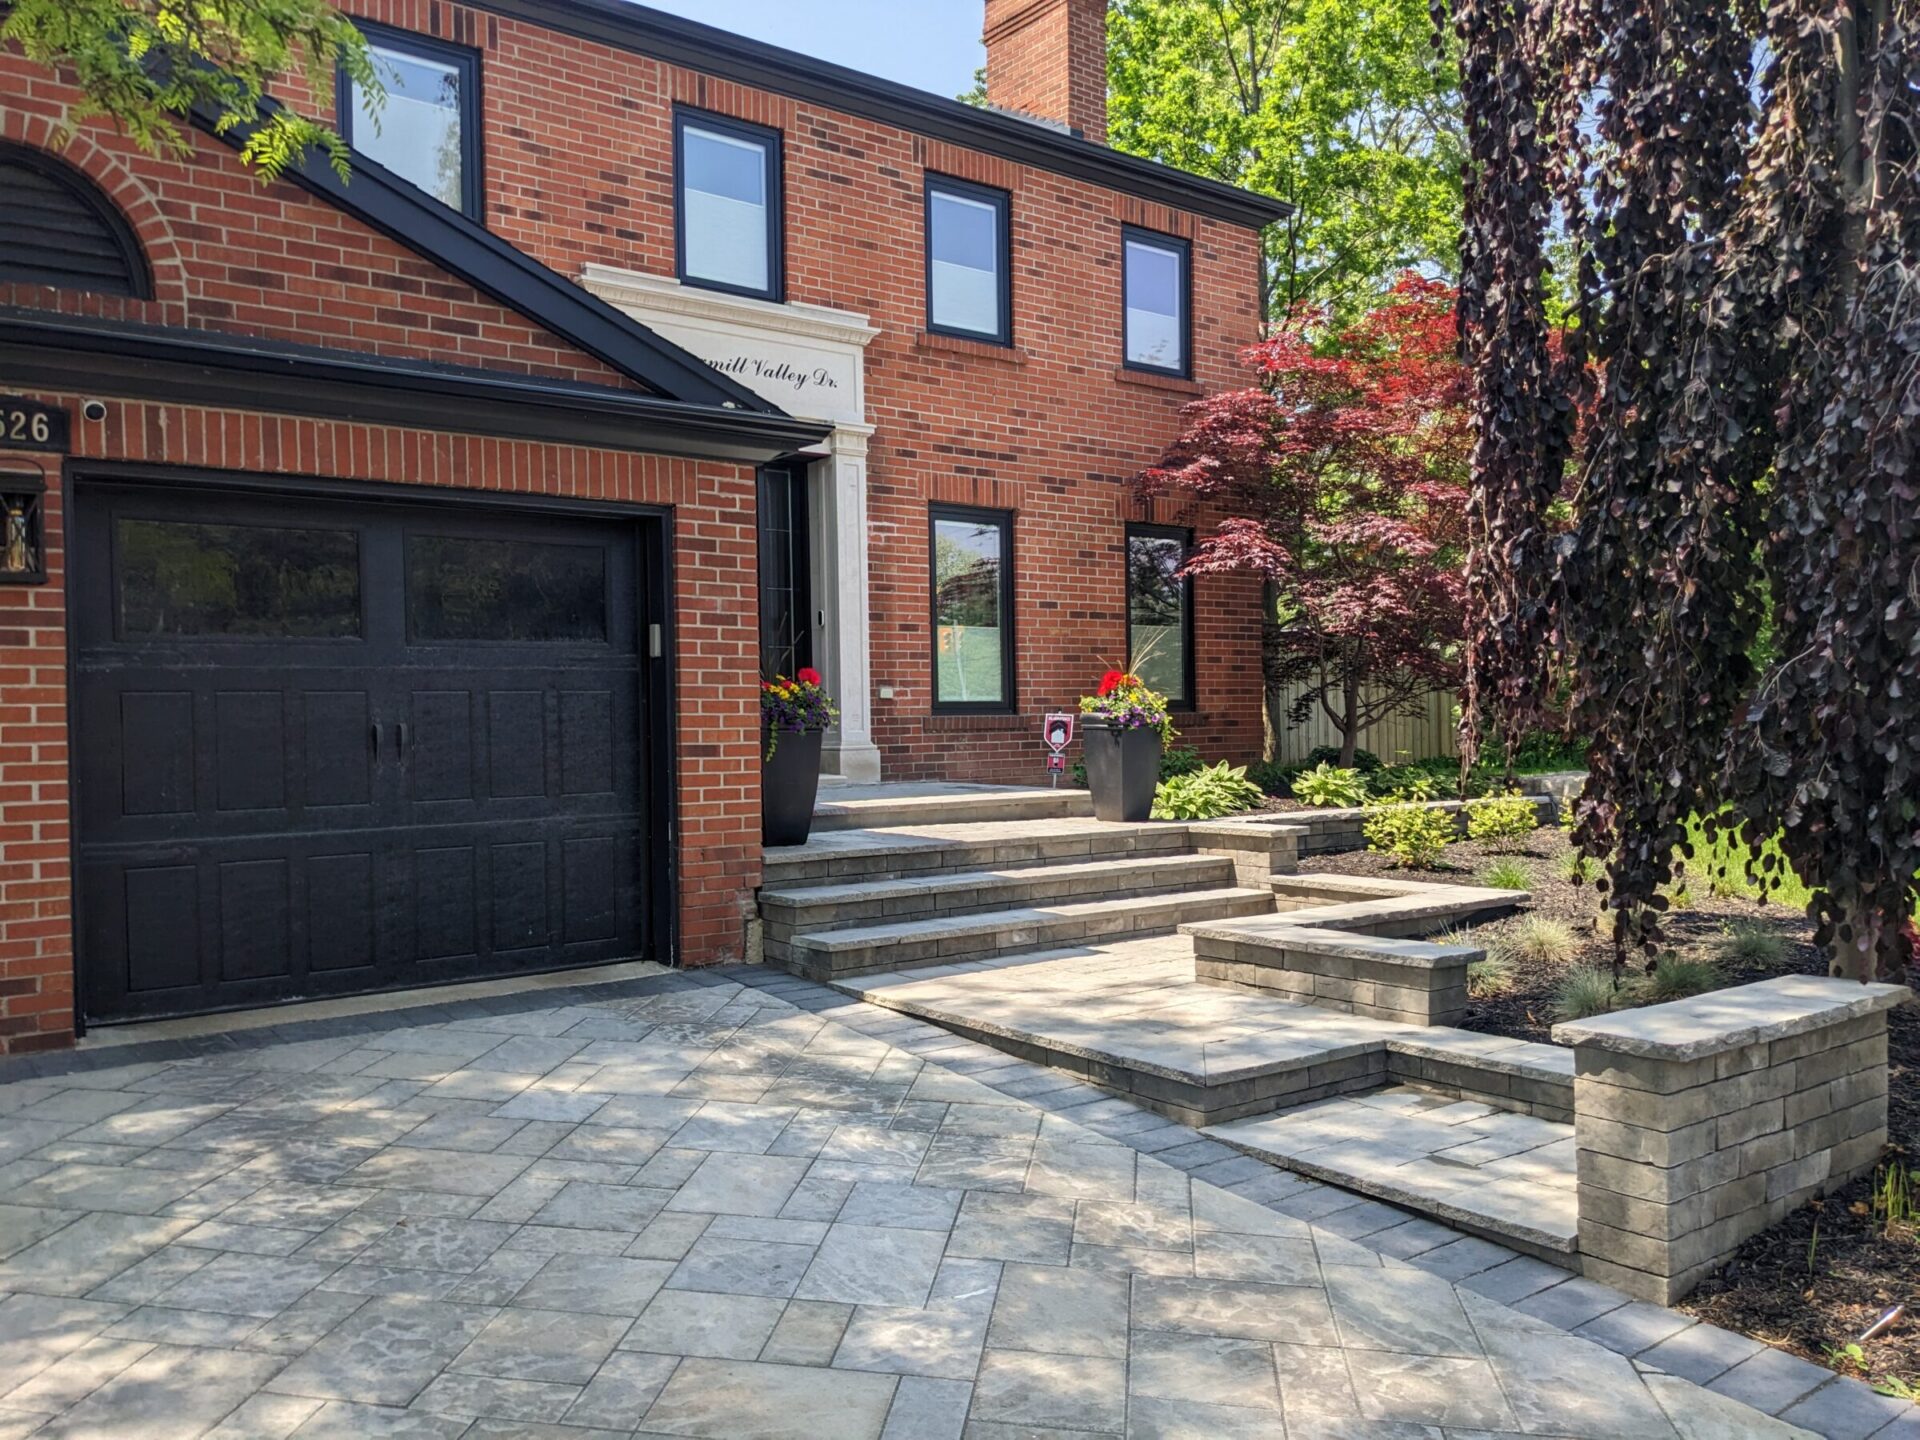 This is an image of a brick house with a black garage door, stone paved driveway, and steps leading to the entrance surrounded by landscaping.